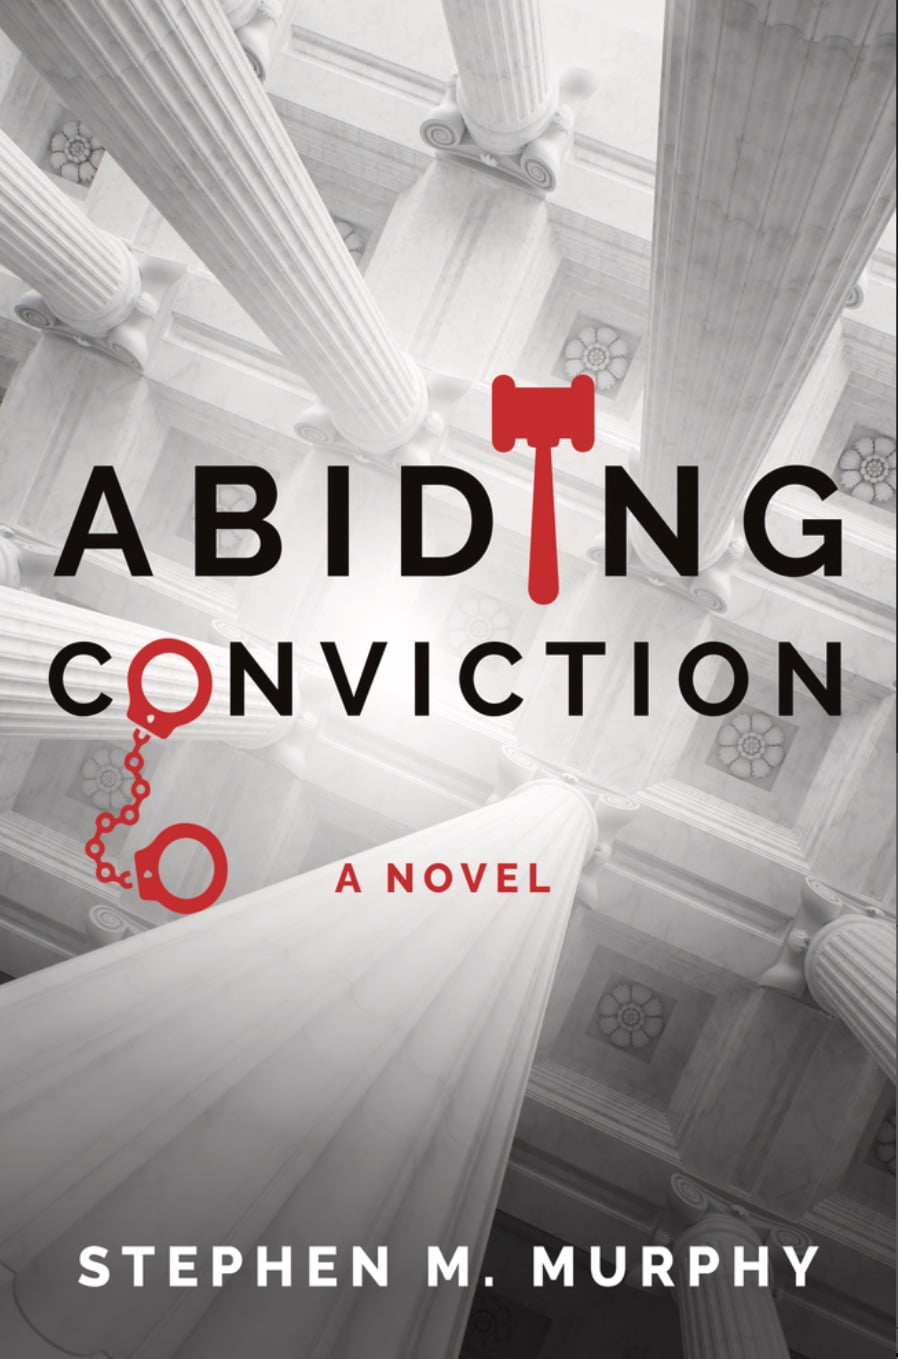 ABIDING CONVICTION BY STEPHEN M. MURPHY – BOOK REVIEW